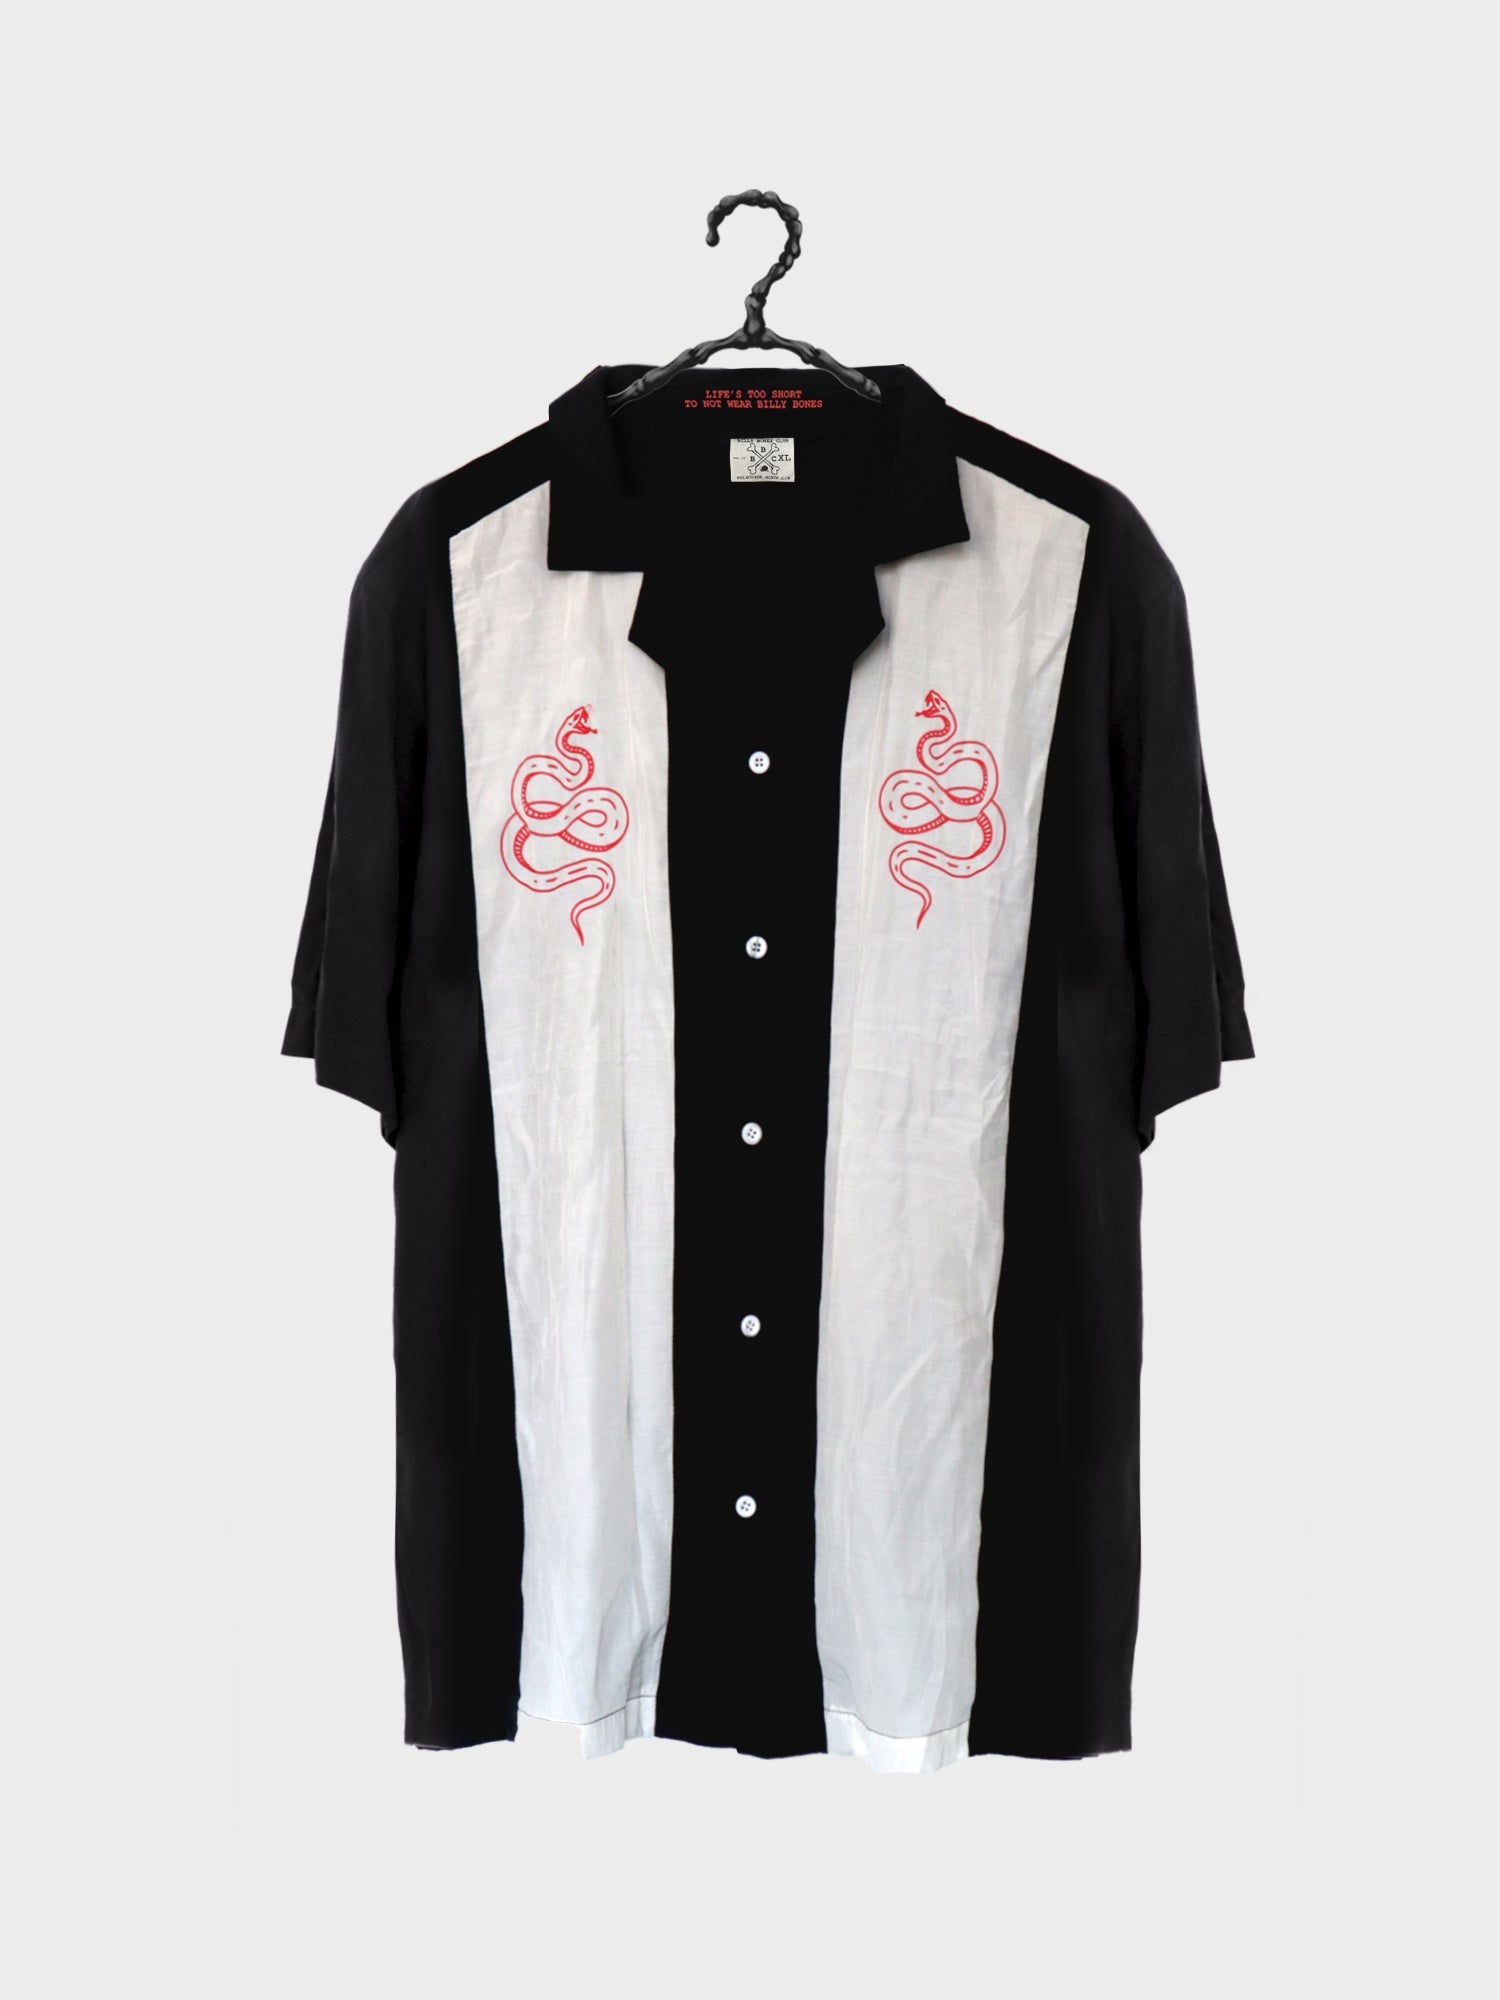 Stay_Bad_White_Black_Button_Up_Front.jpg